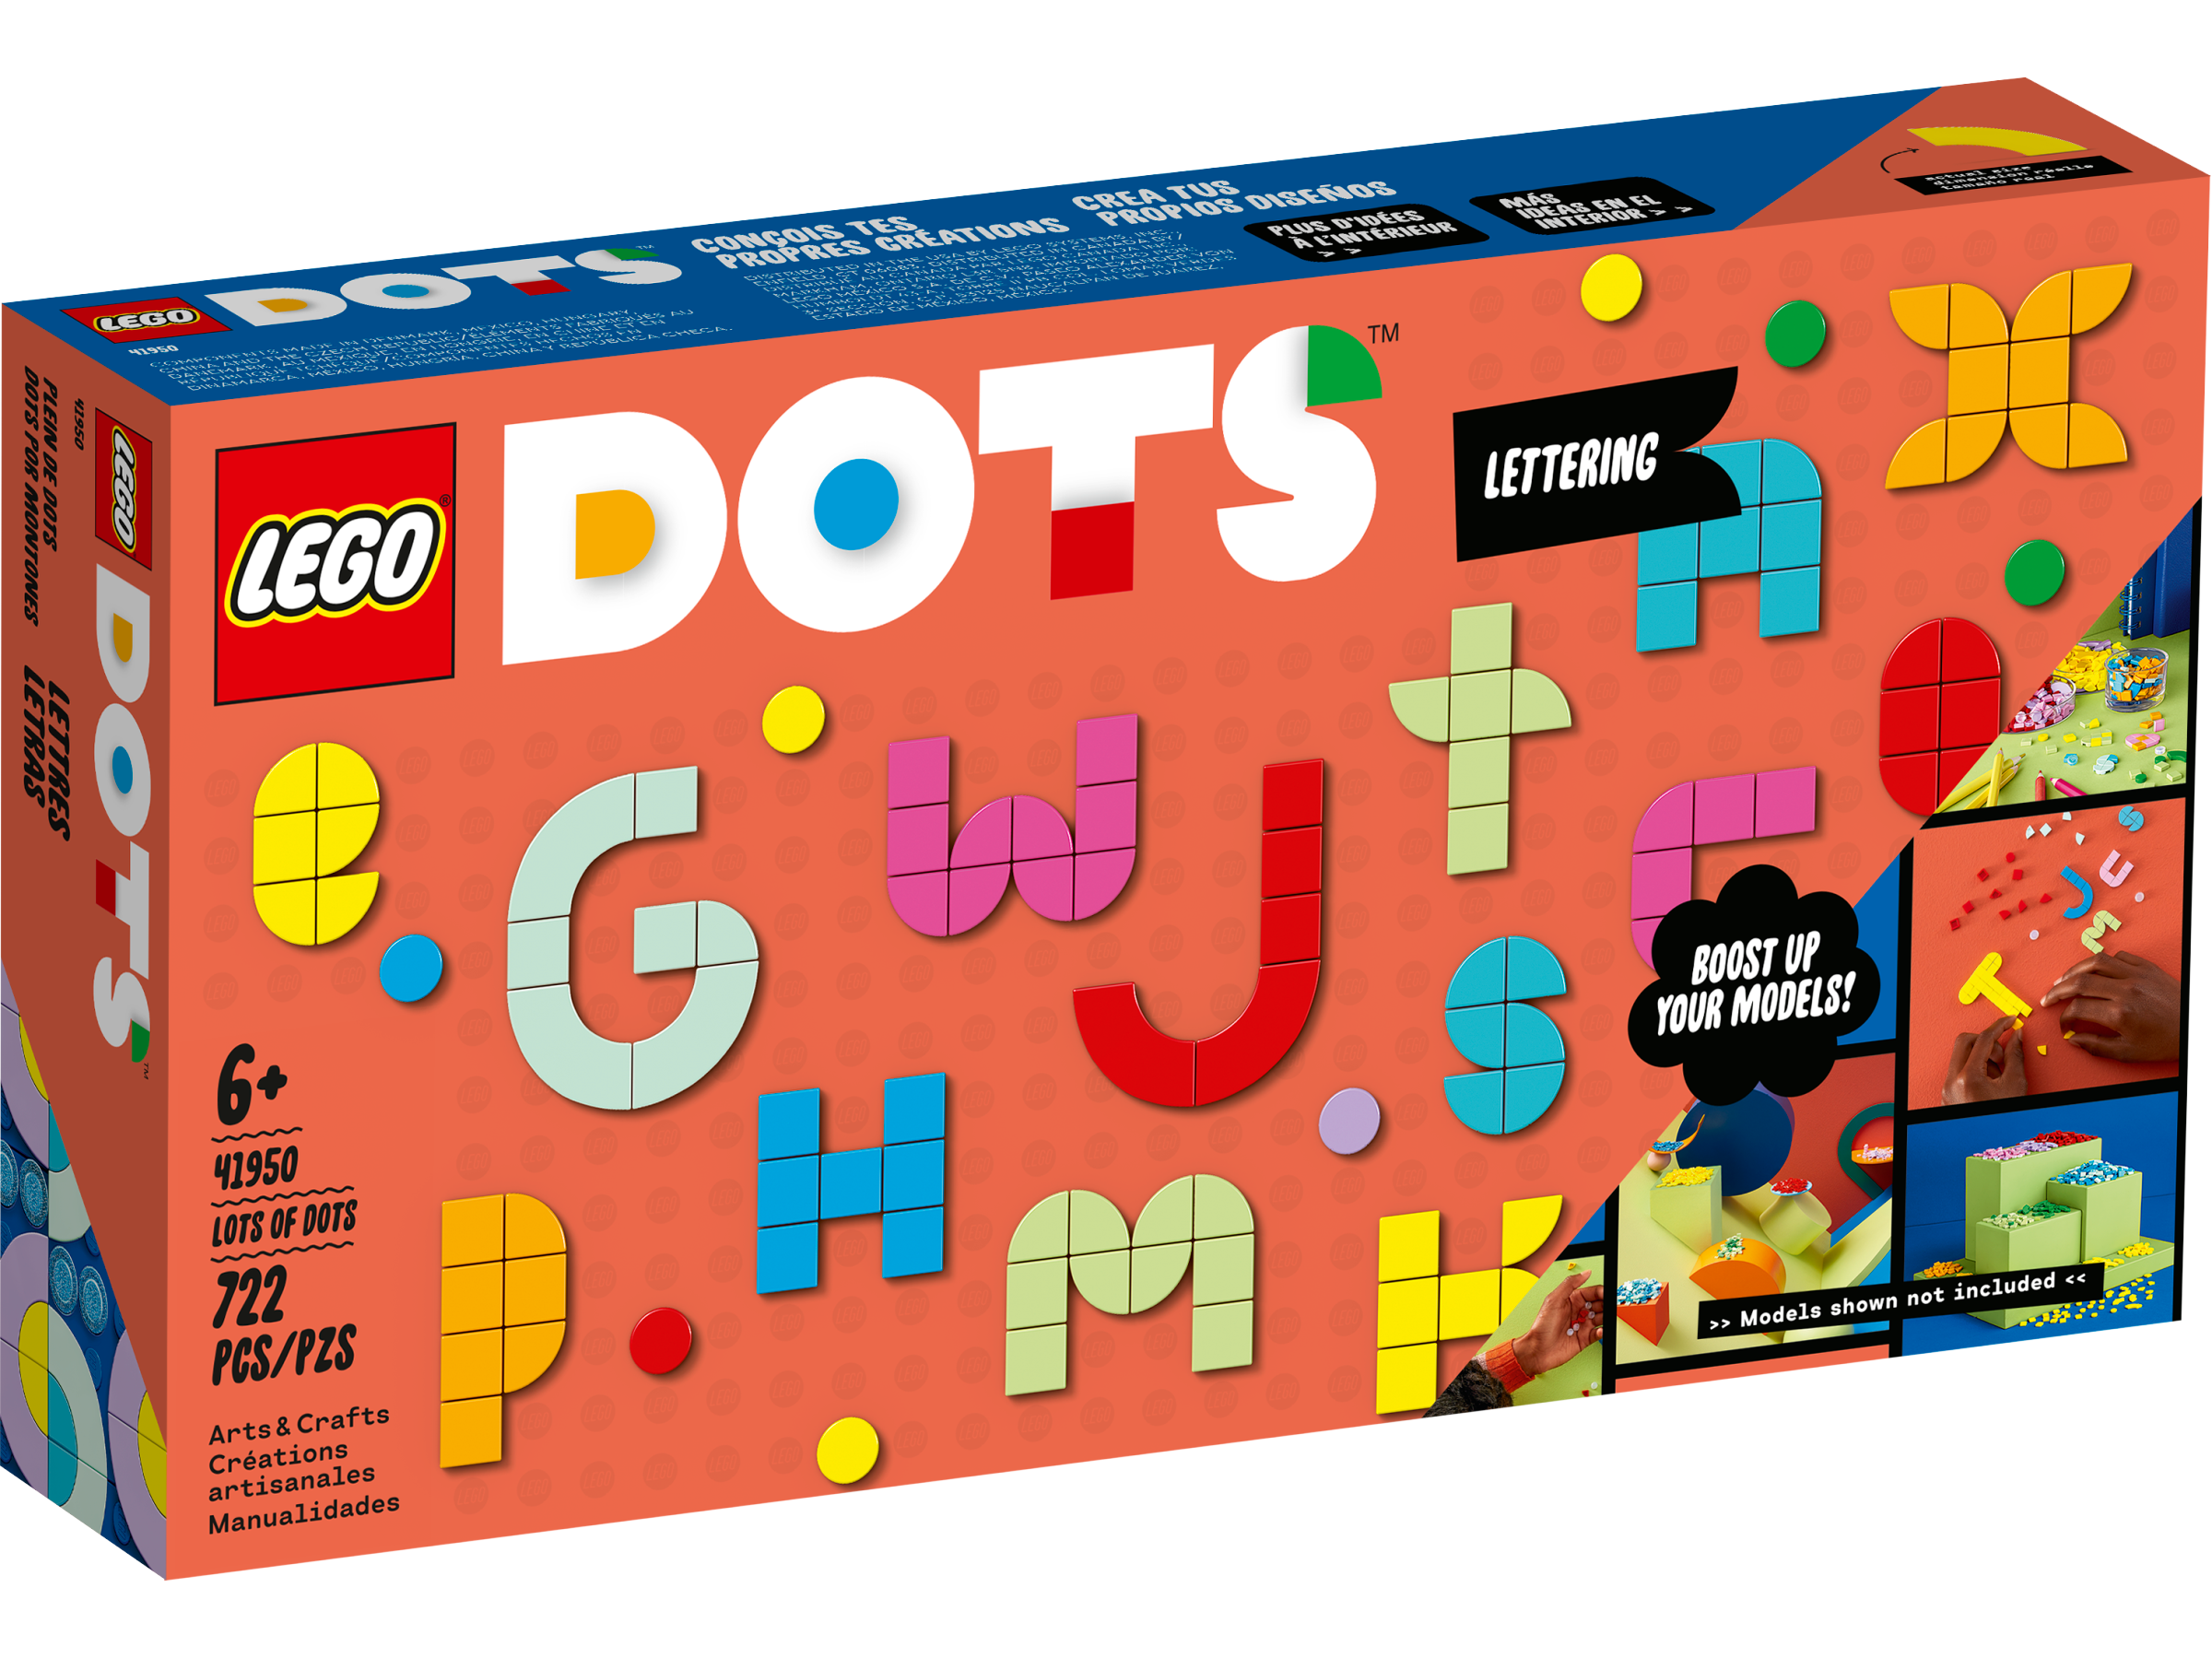 Lots of DOTS – Lettering 41950, DOTS